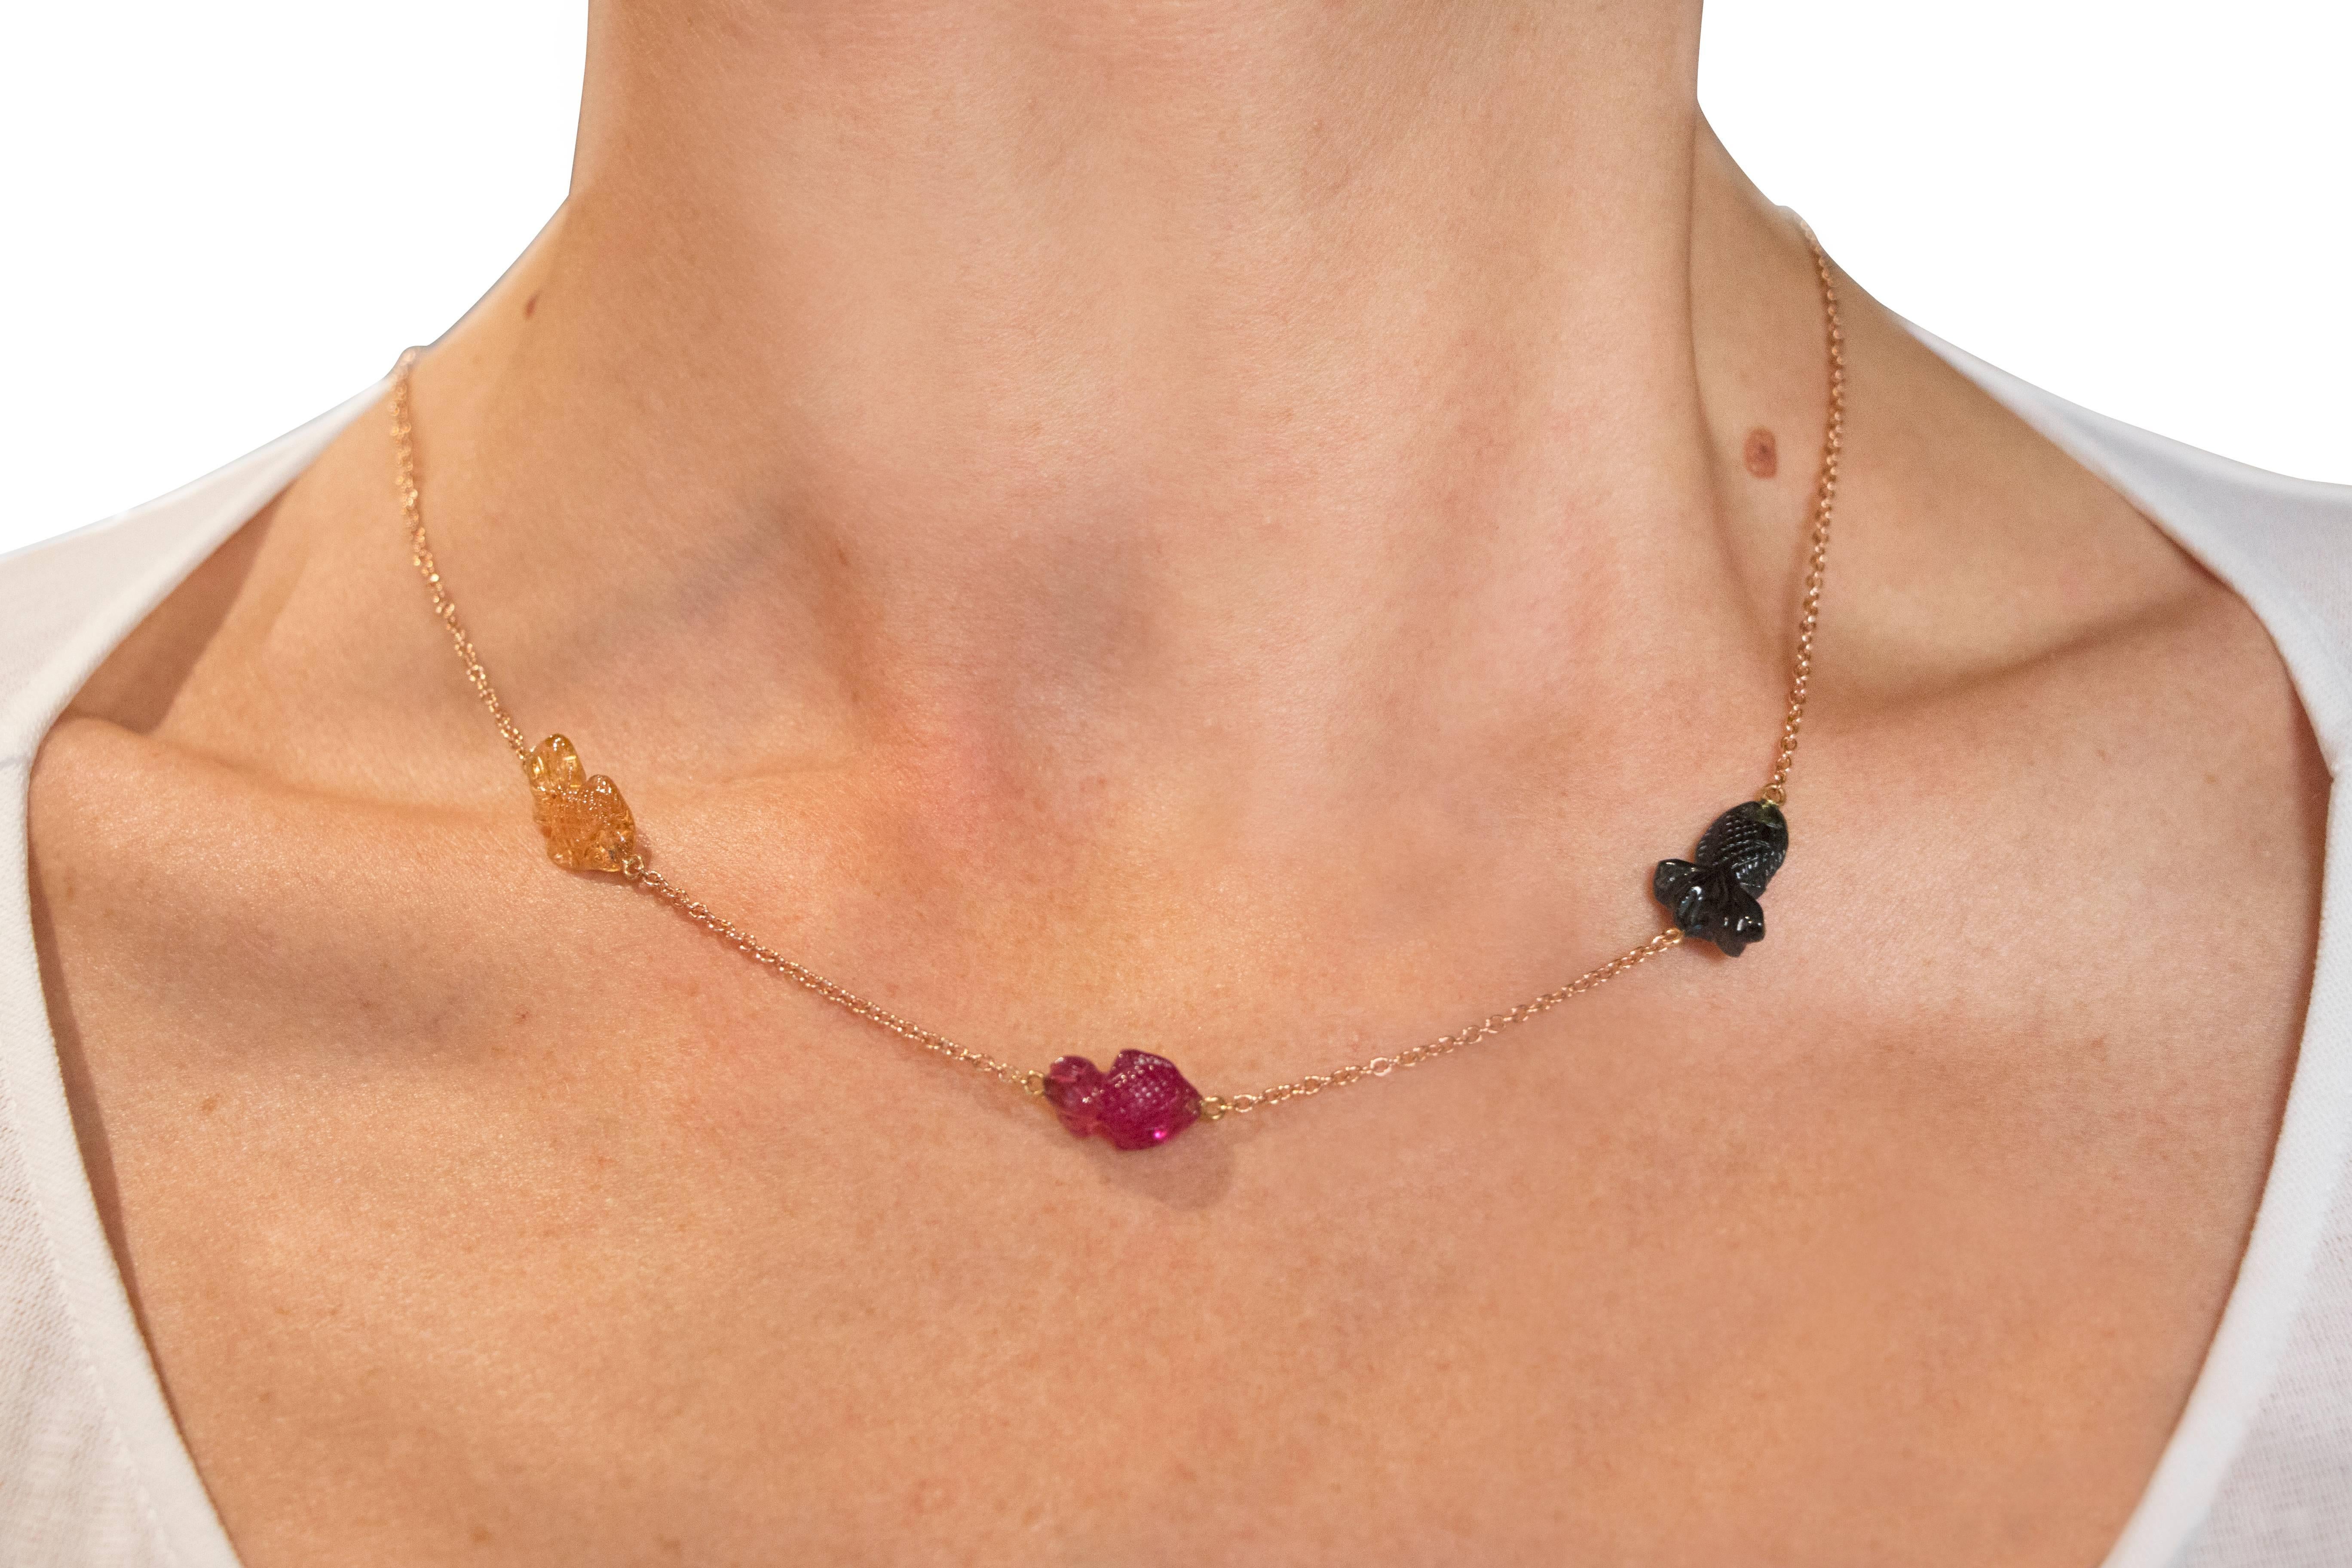 Jona design collection, hand crafted in Italy, 18 karat rose gold chain necklace, centering three multicolor tourmaline fish .
All Jona jewelry is new and has never been previously owned or worn. Each item will arrive at your door beautifully gift